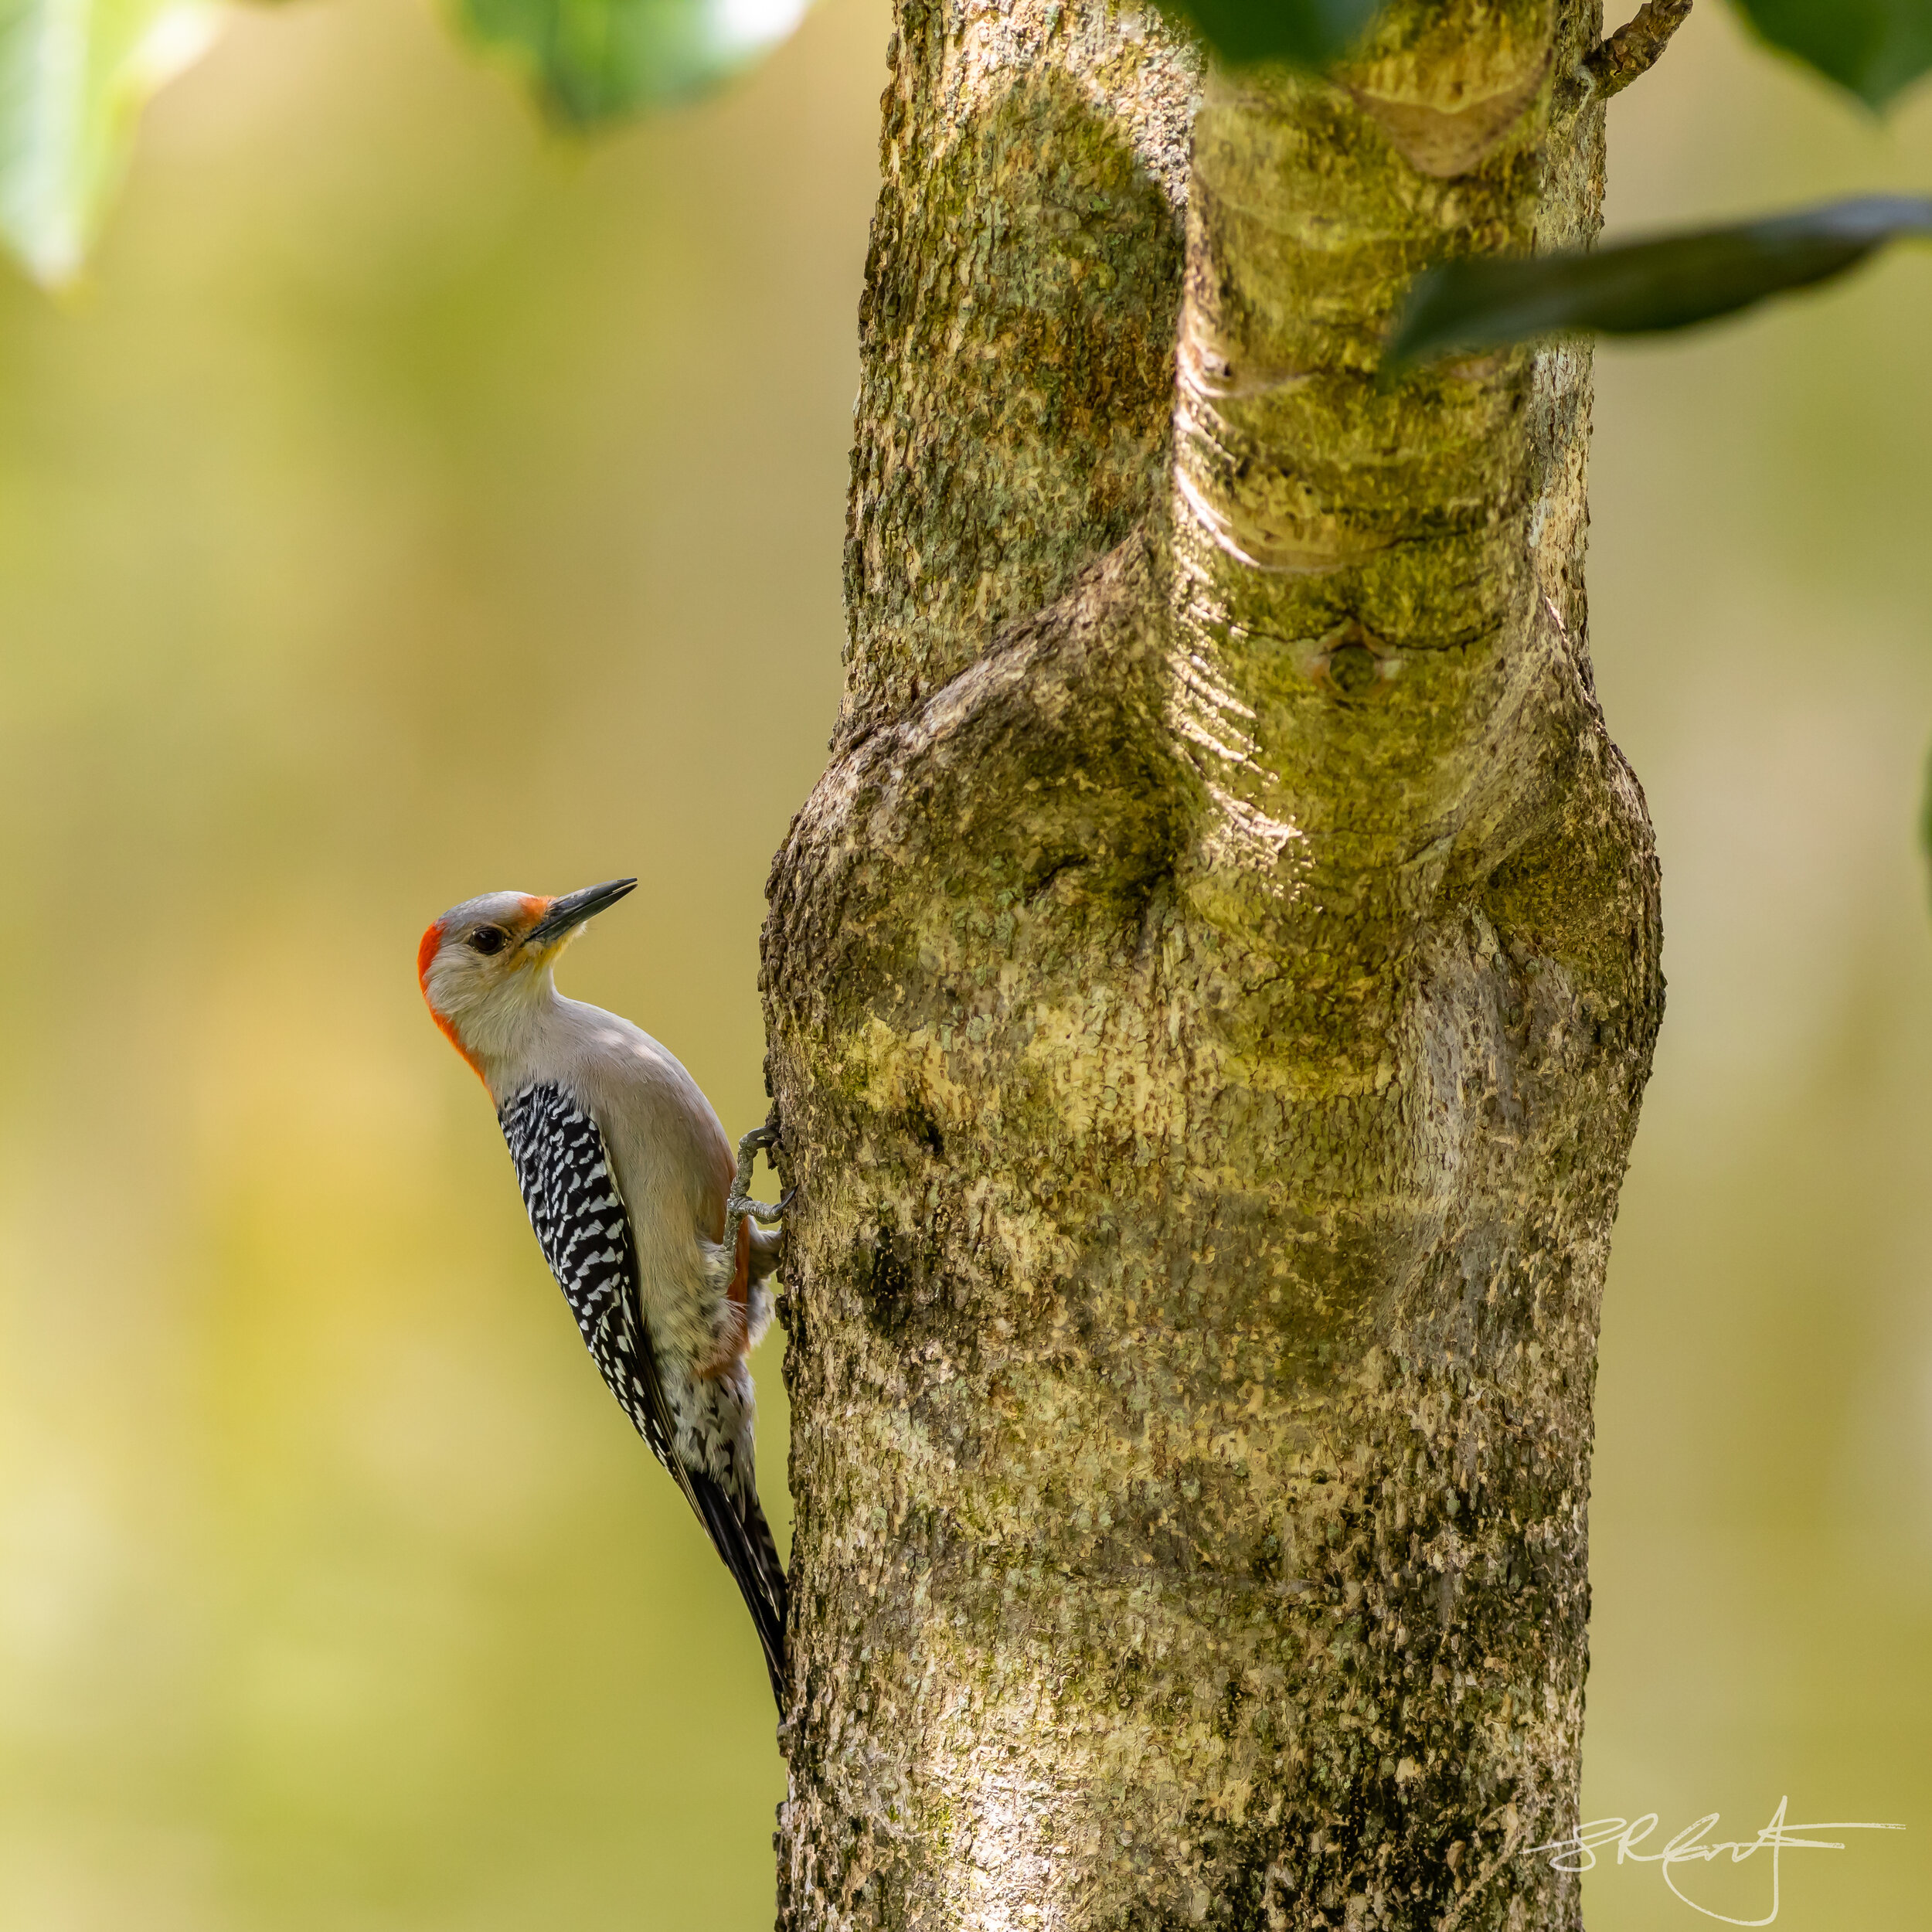 Red Bellied Woodpecker on the Arbicola Tree.